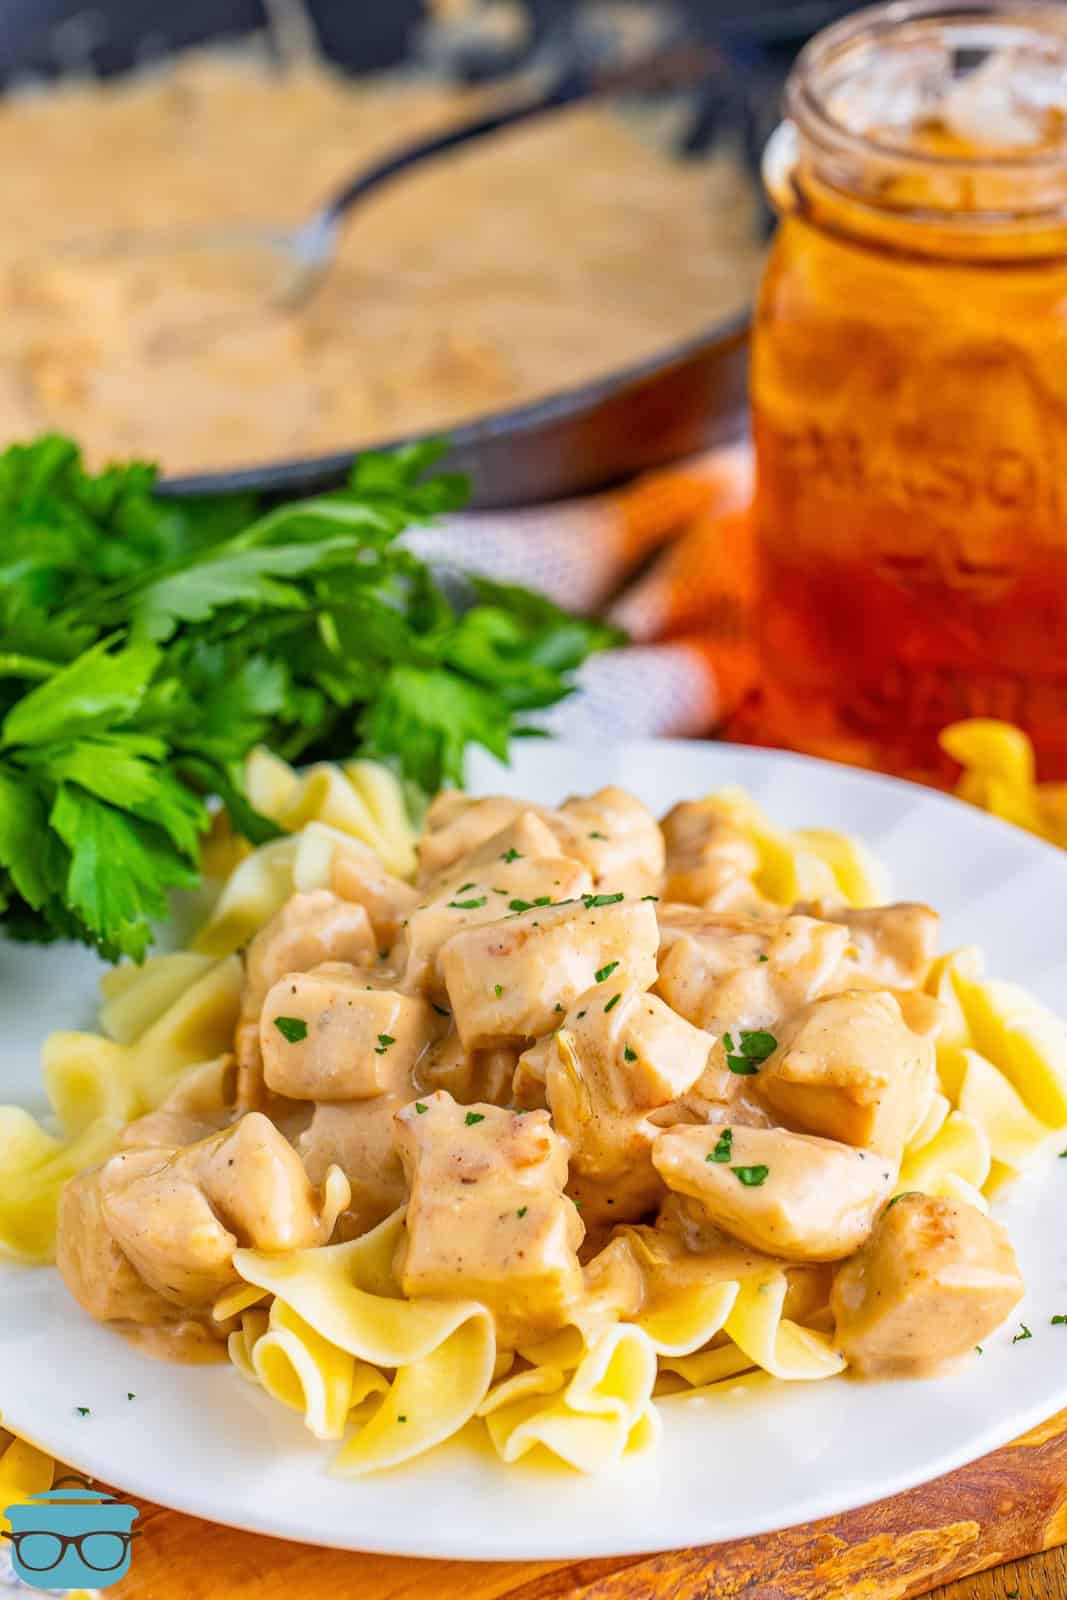 A plate of Chicken Stroganoff with creamy sauce next to a glass of tea